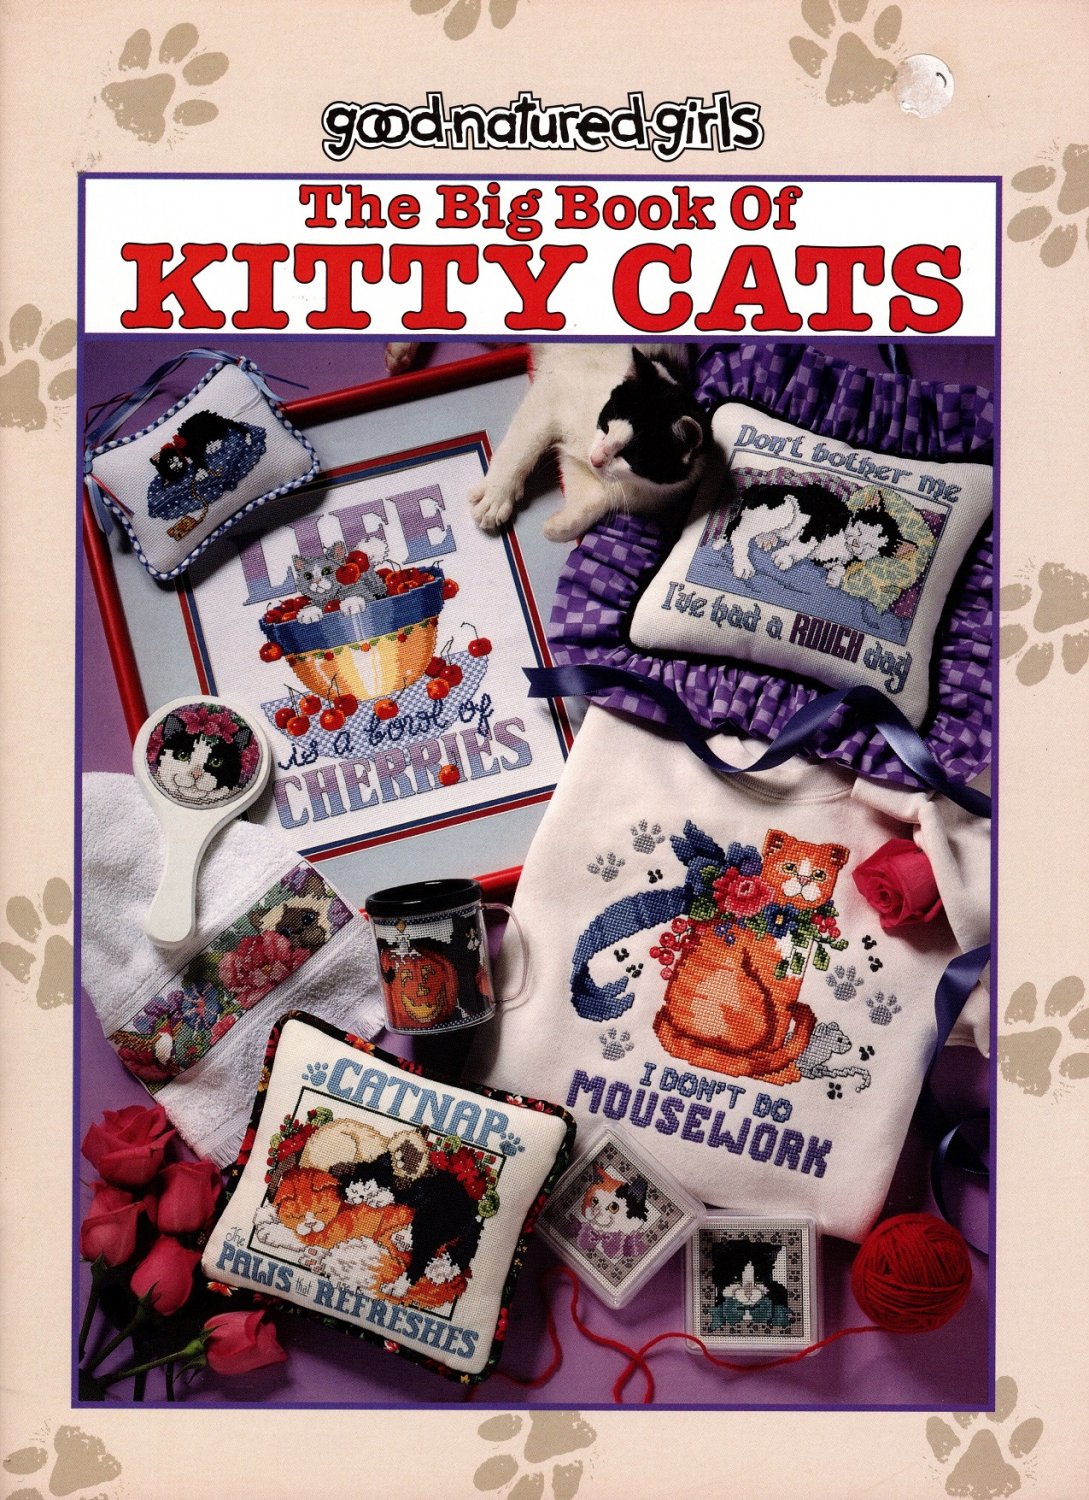 The Big Book Of Kitty Cats Good Natured Girls Cross